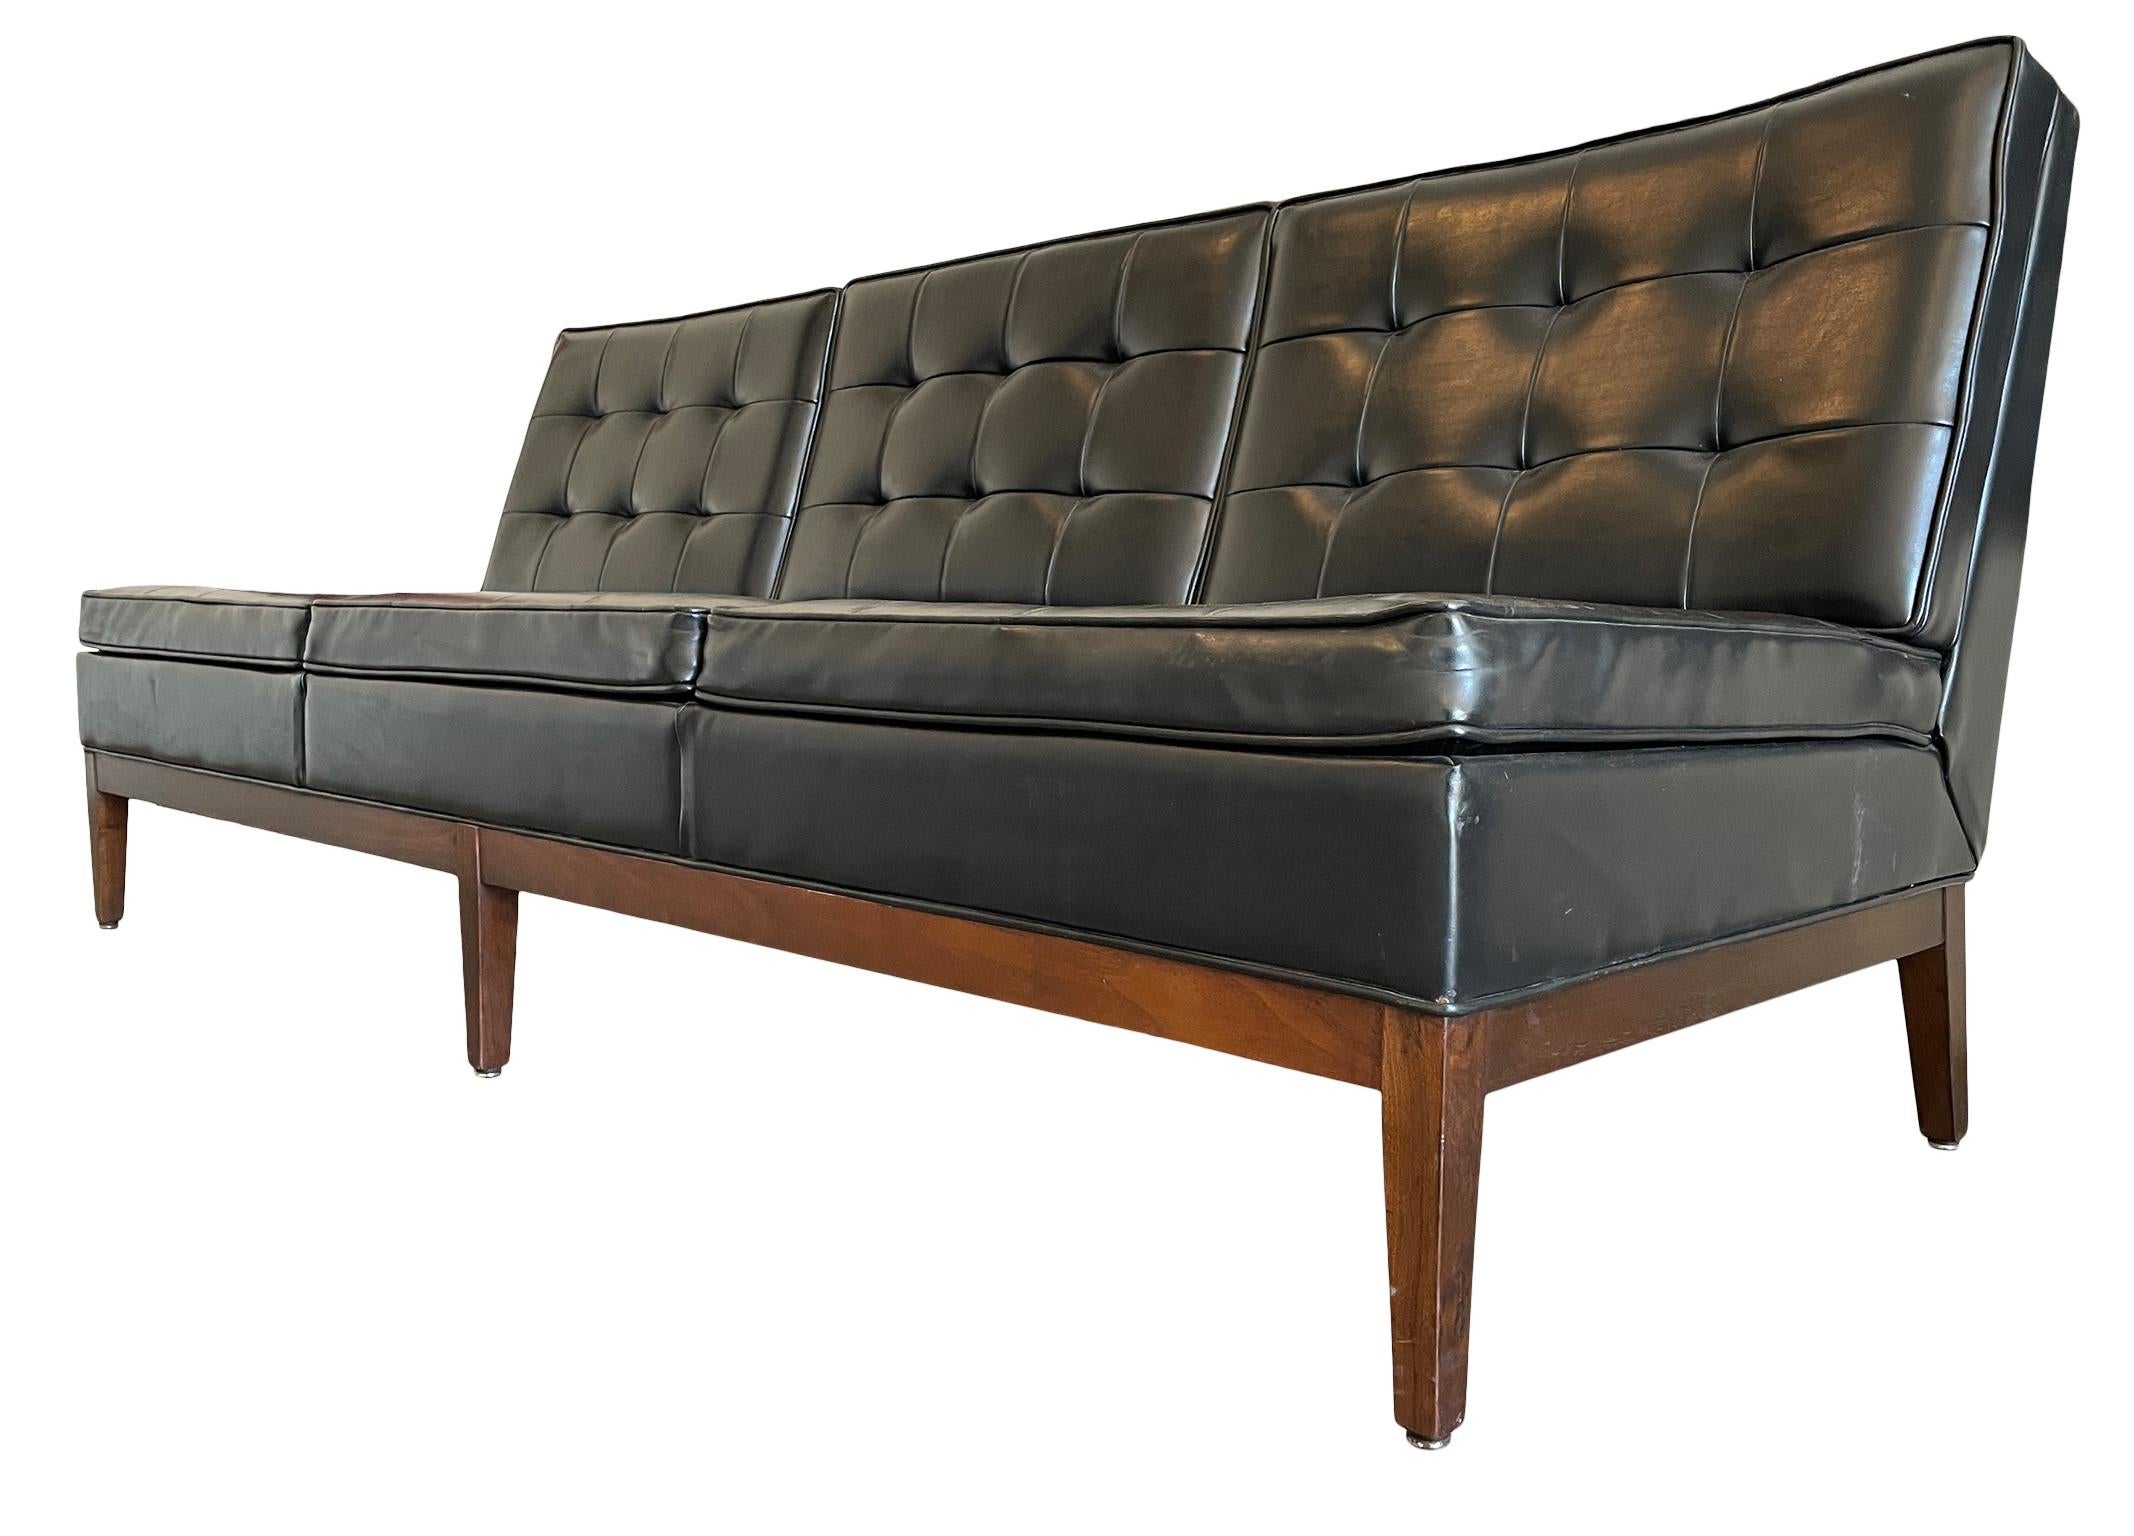 Midcentury Thonet Sofa Three-Seat Solid Walnut Base Black Vinyl Upholstery In Good Condition For Sale In BROOKLYN, NY